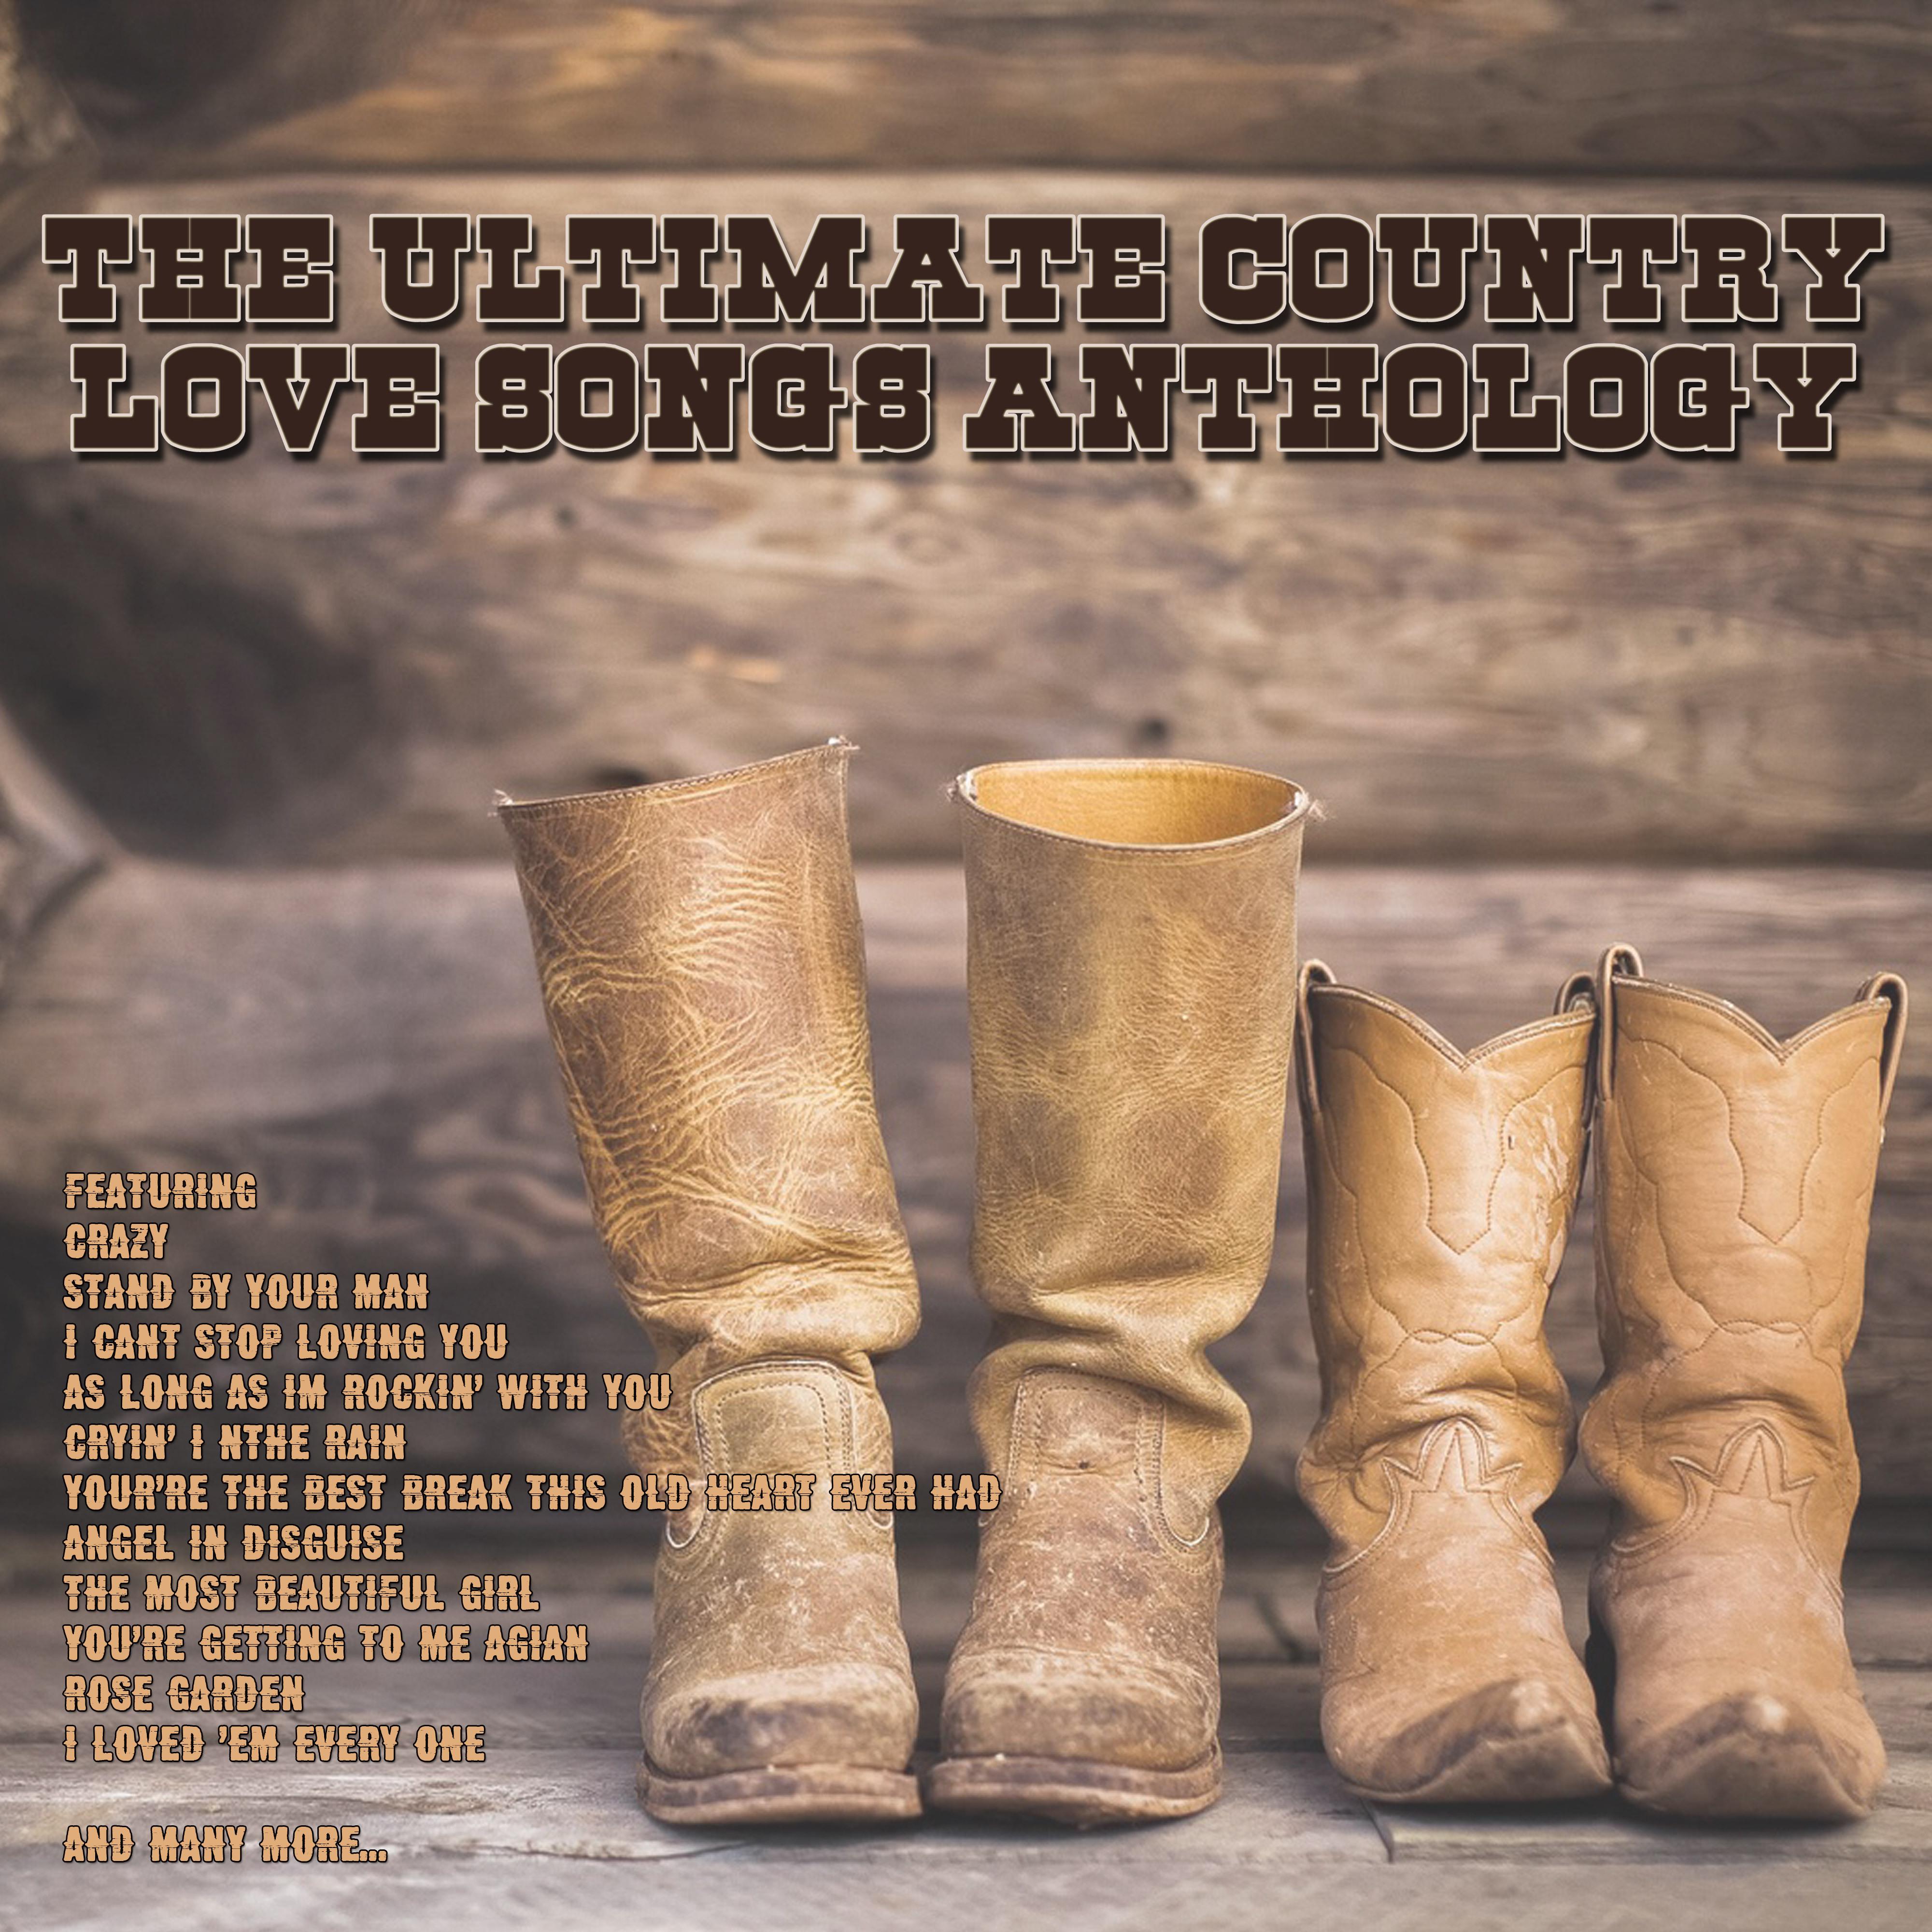 The Ultimate Country Love Songs Anthology